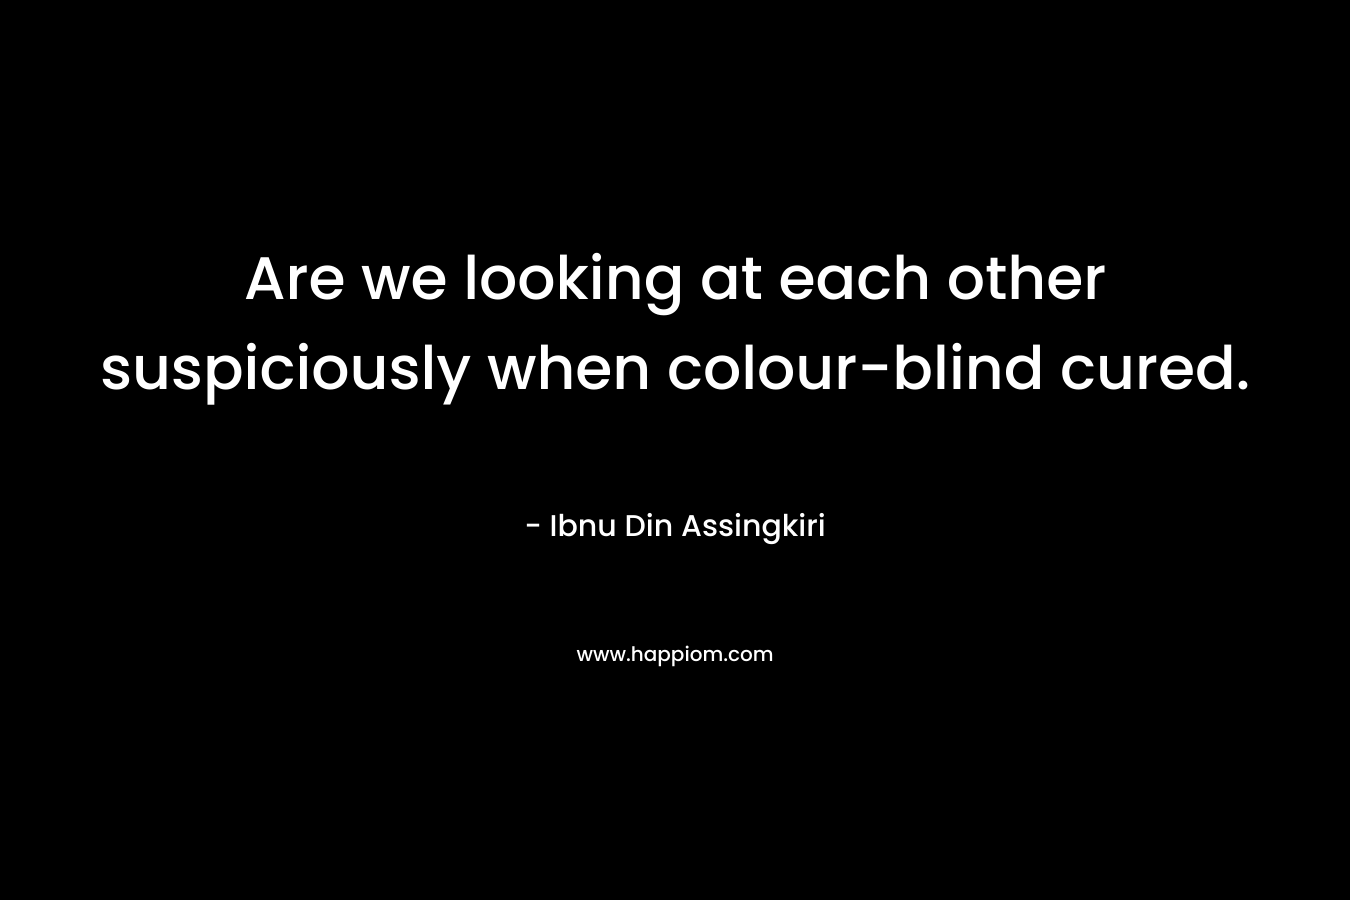 Are we looking at each other suspiciously when colour-blind cured.